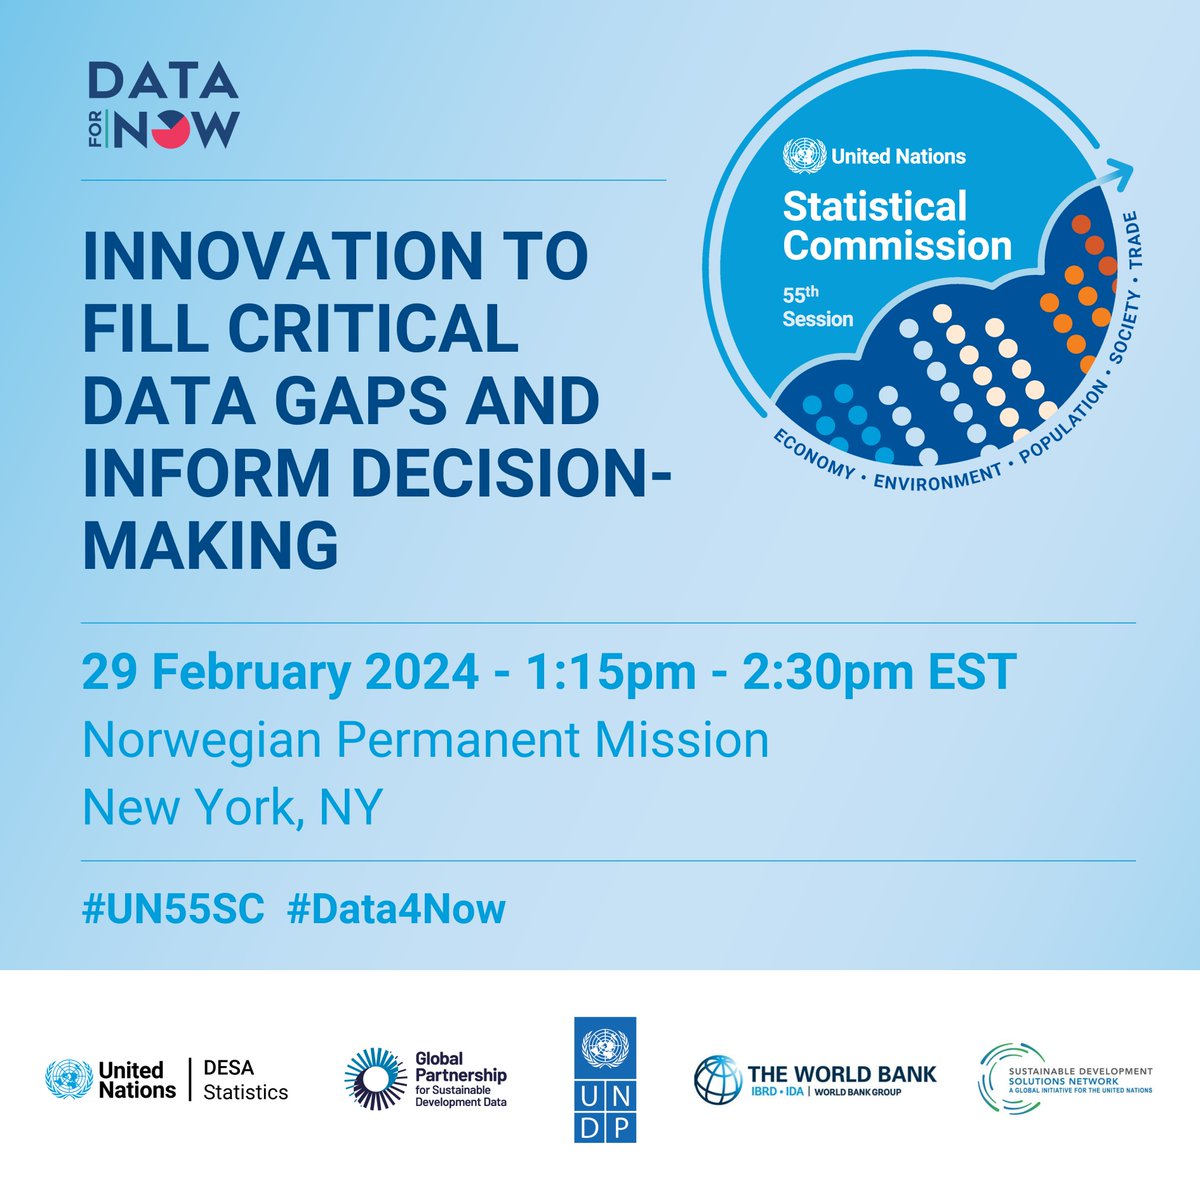 Together, we can harness the #PowerOfData for a better future. Join us in NY on Feb 29 at the #Data4Now initiative event to learn how we're driving impactful change through innovation and collaboration: bit.ly/Data4NowUN55SC
#UN55SC